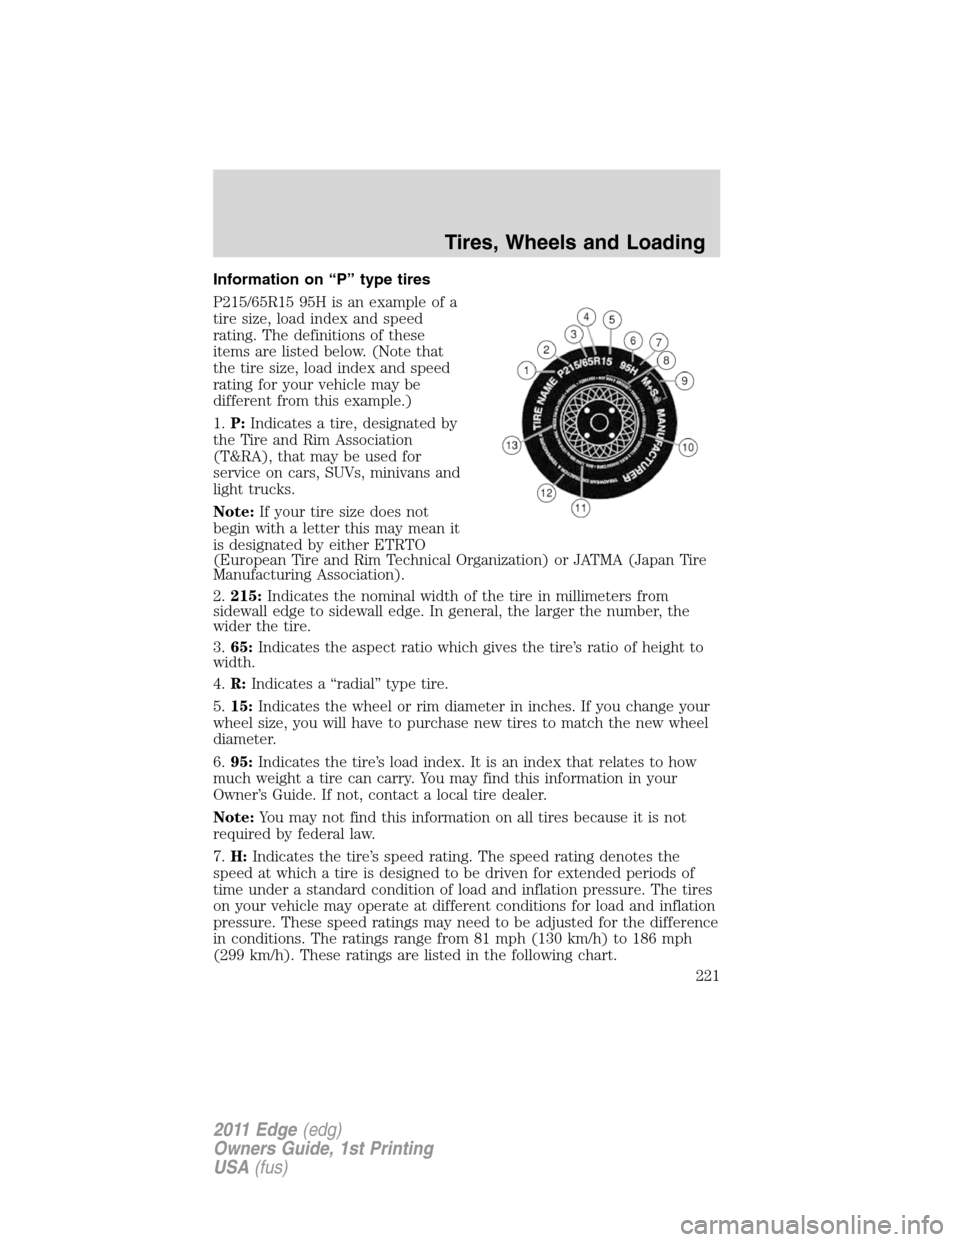 FORD EDGE 2011 1.G User Guide Information on “P” type tires
P215/65R15 95H is an example of a
tire size, load index and speed
rating. The definitions of these
items are listed below. (Note that
the tire size, load index and sp